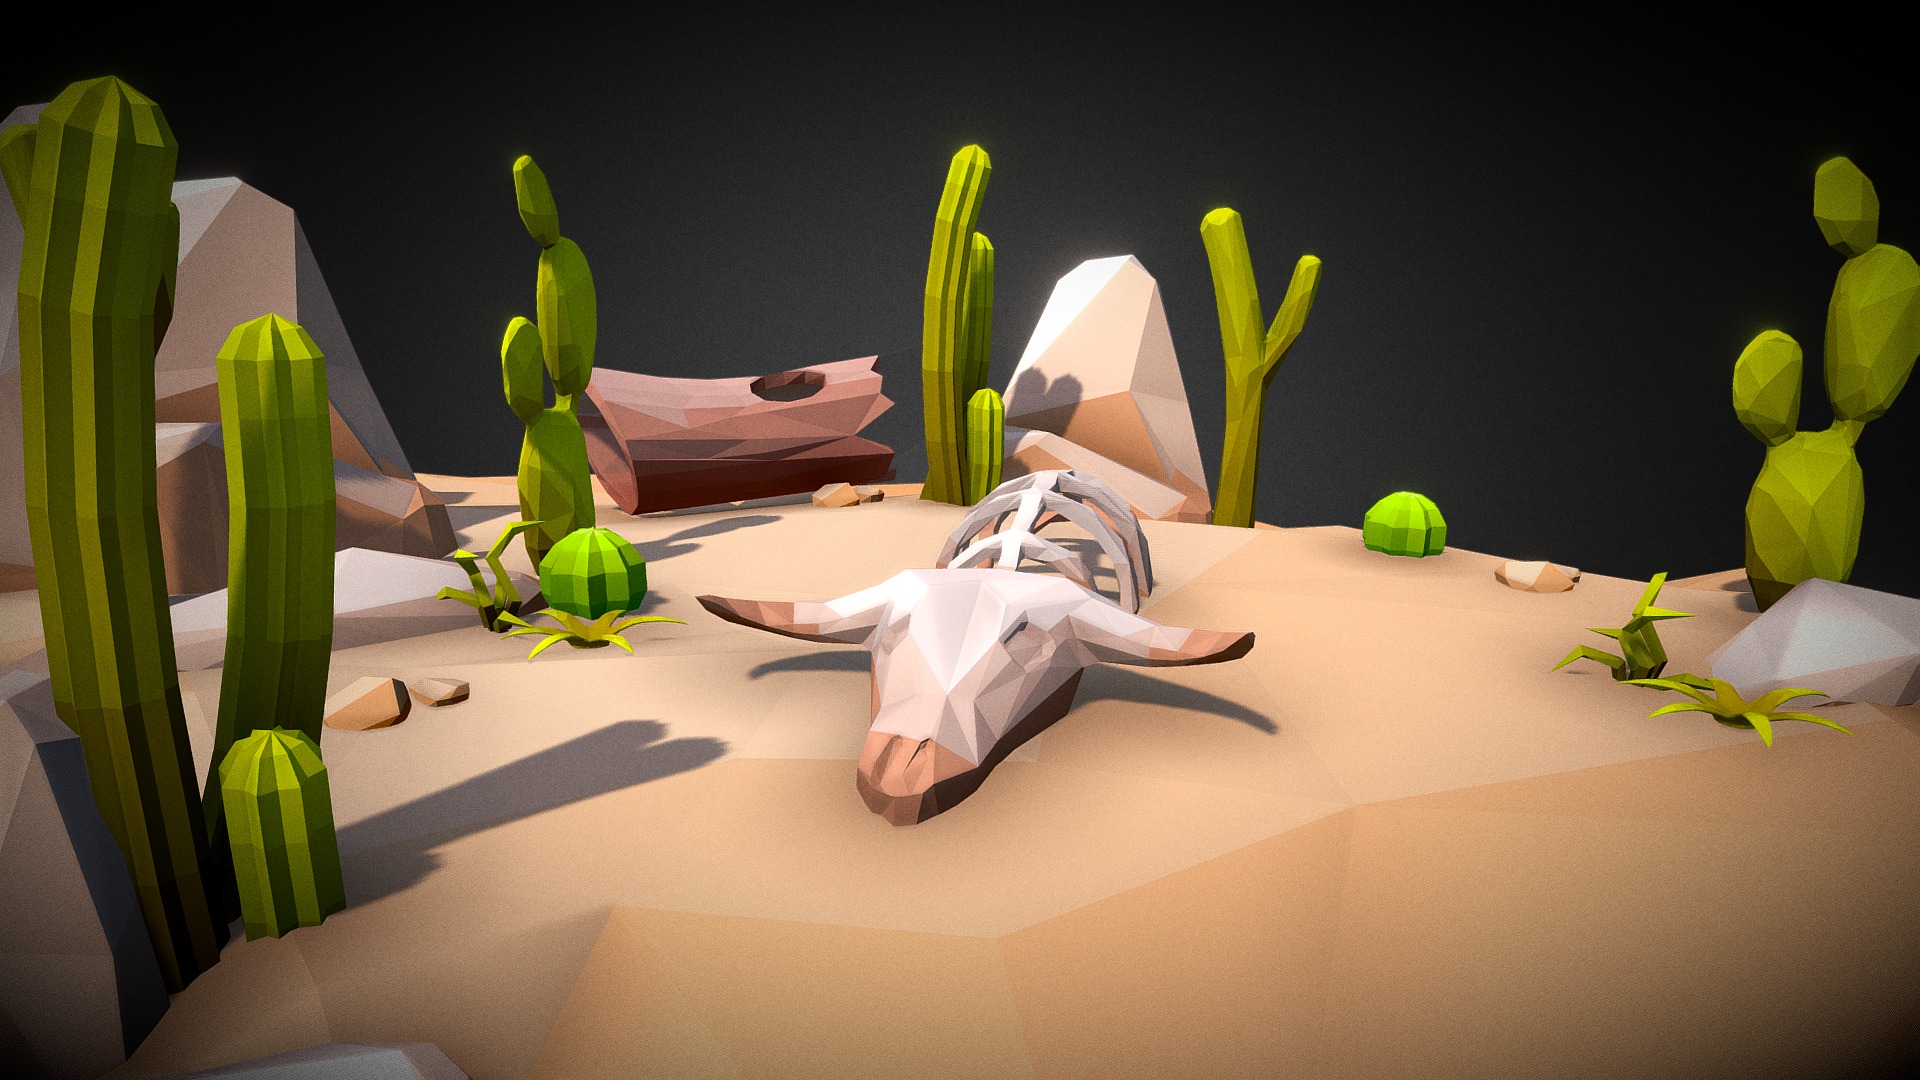 3D model Low Poly Environment Set 005 – Desert Assets - This is a 3D model of the Low Poly Environment Set 005 - Desert Assets. The 3D model is about a group of objects on a surface.